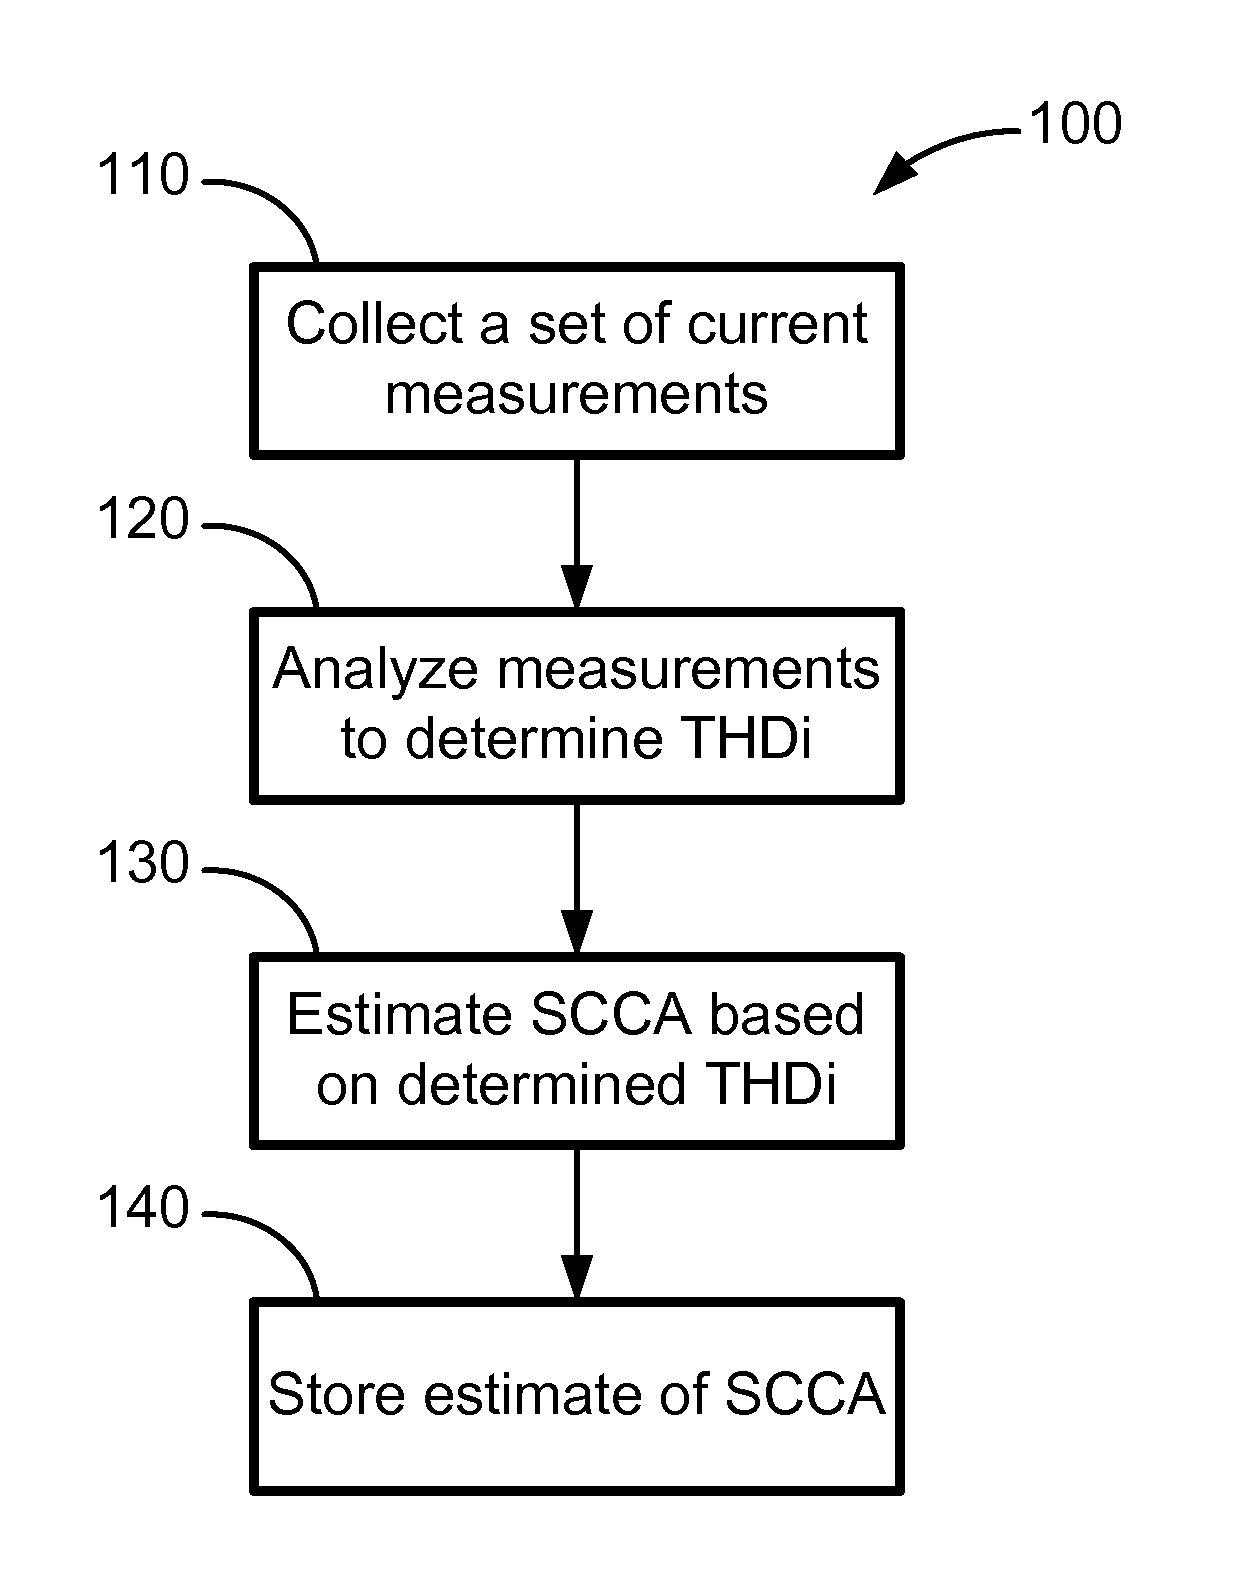 Method of Estimating Short Circuit Current Available by Analysis of DC Charging Circuit